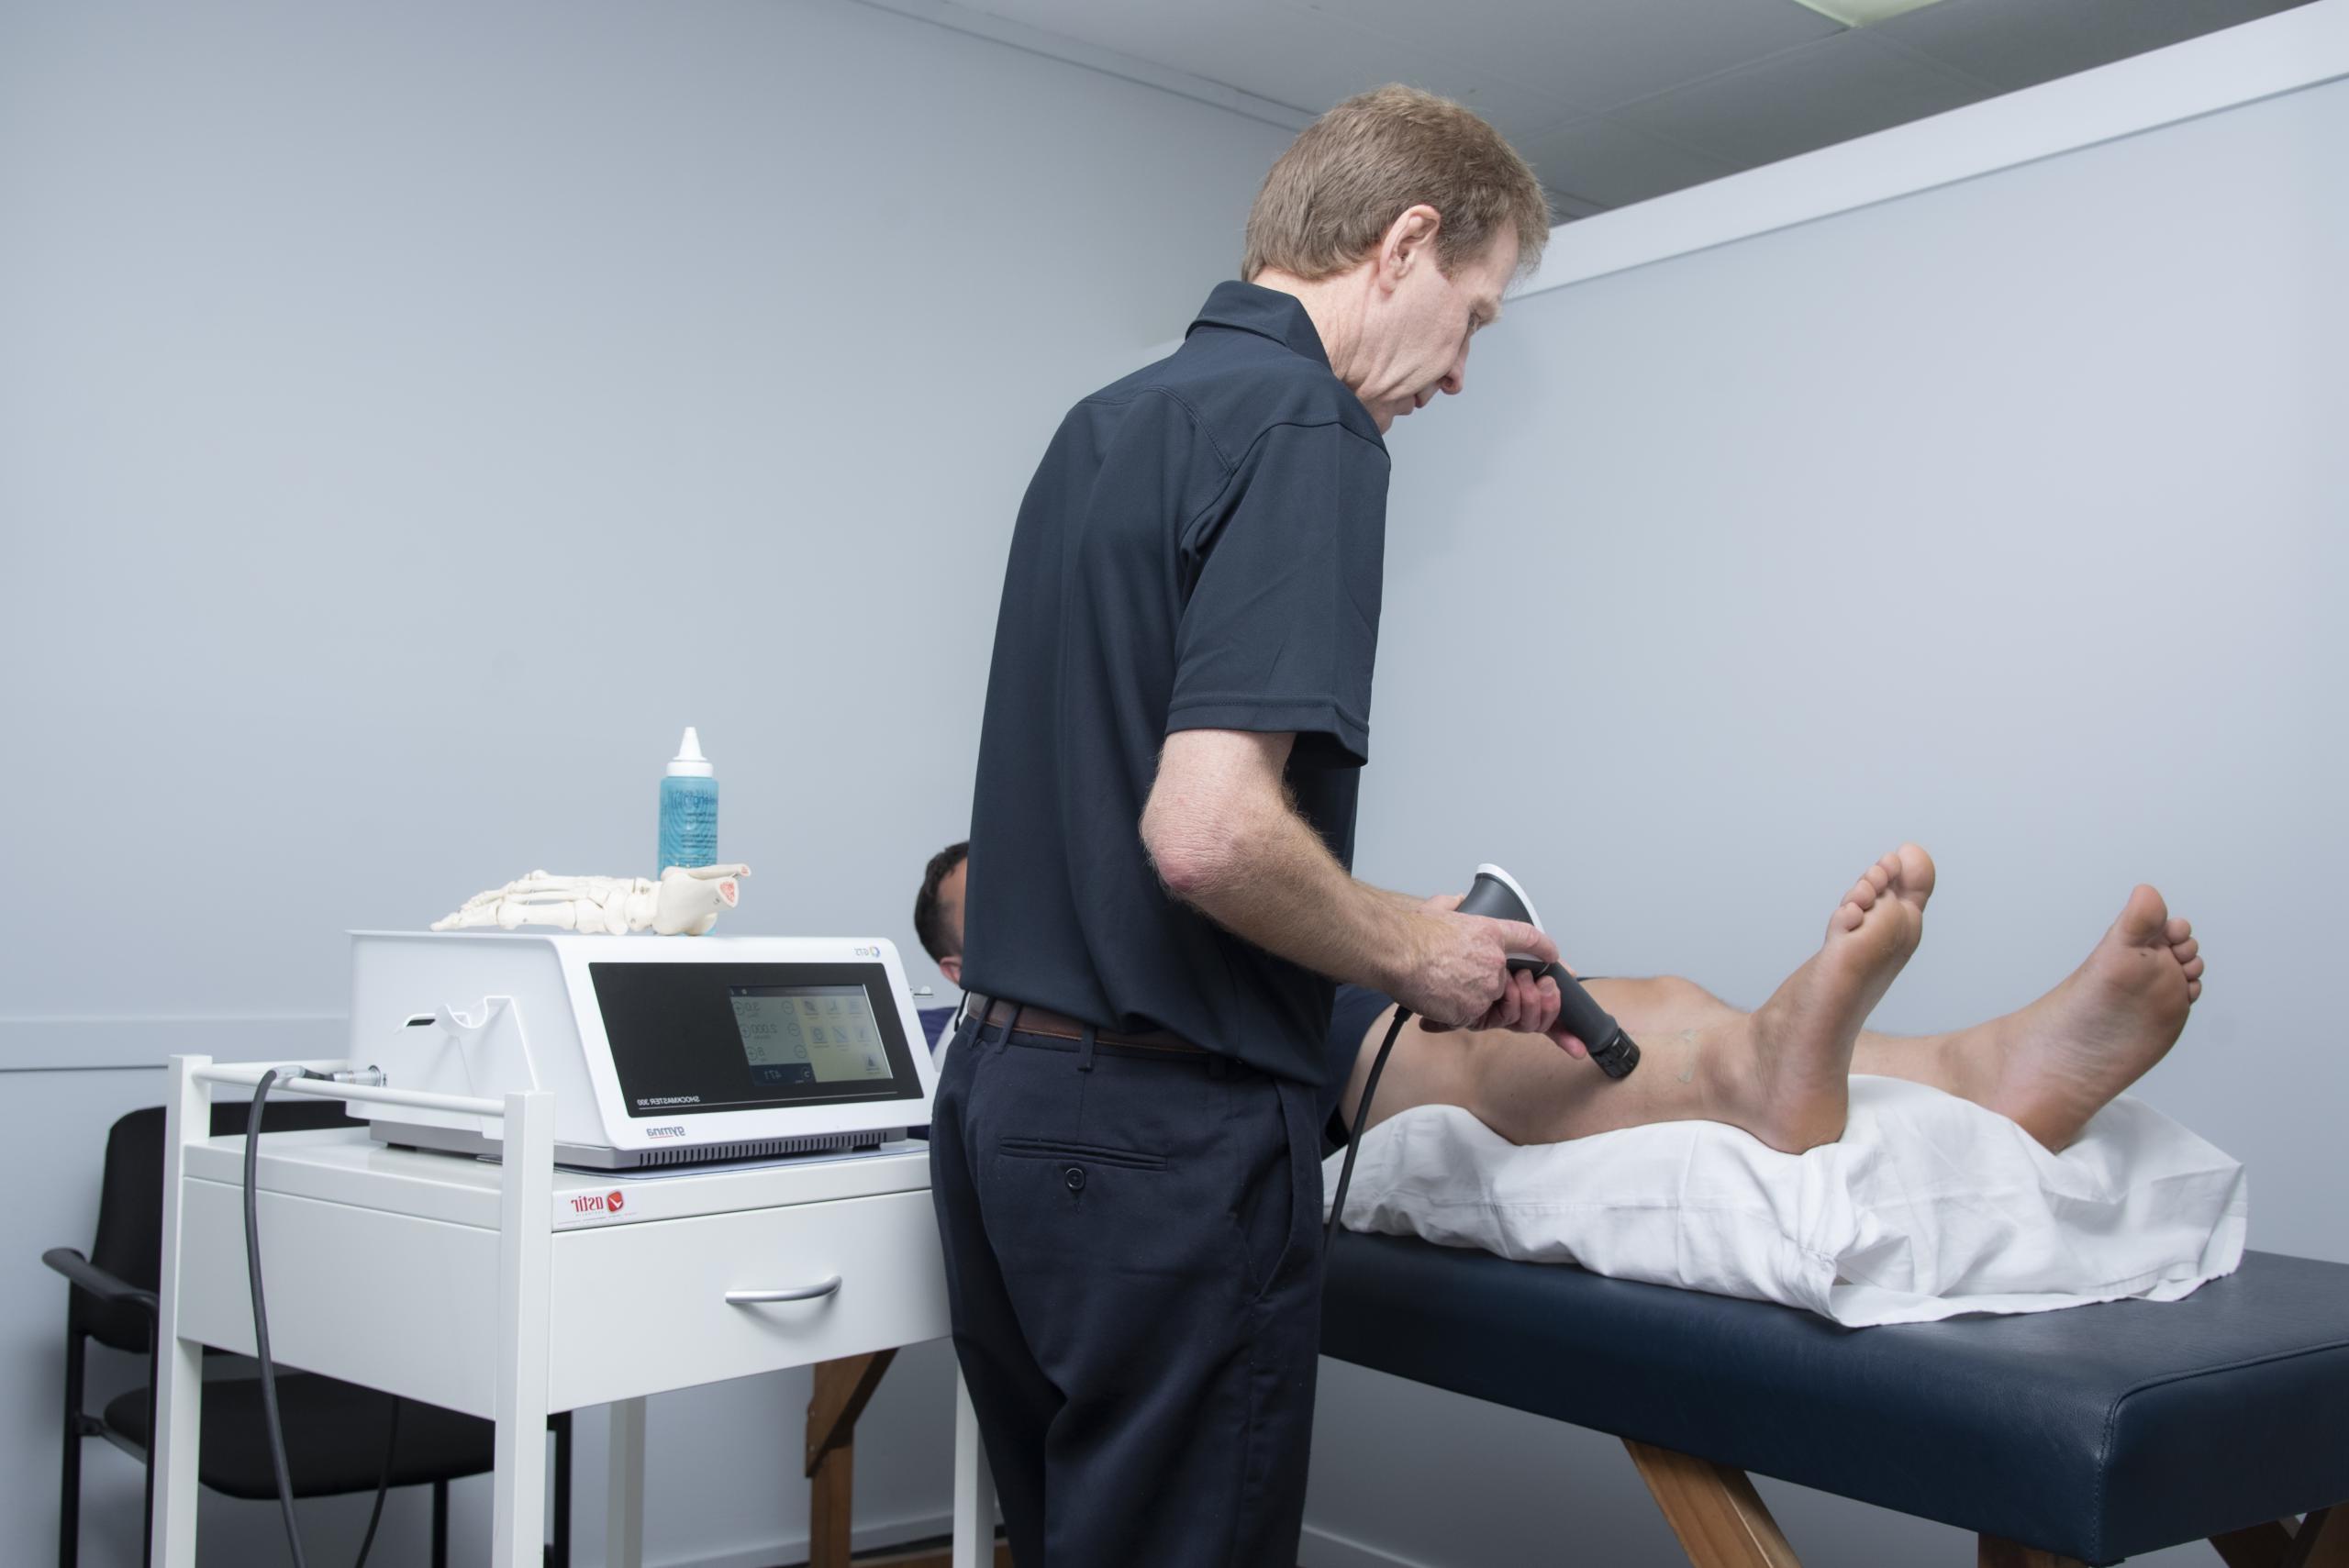 shockwave therapy to a patient